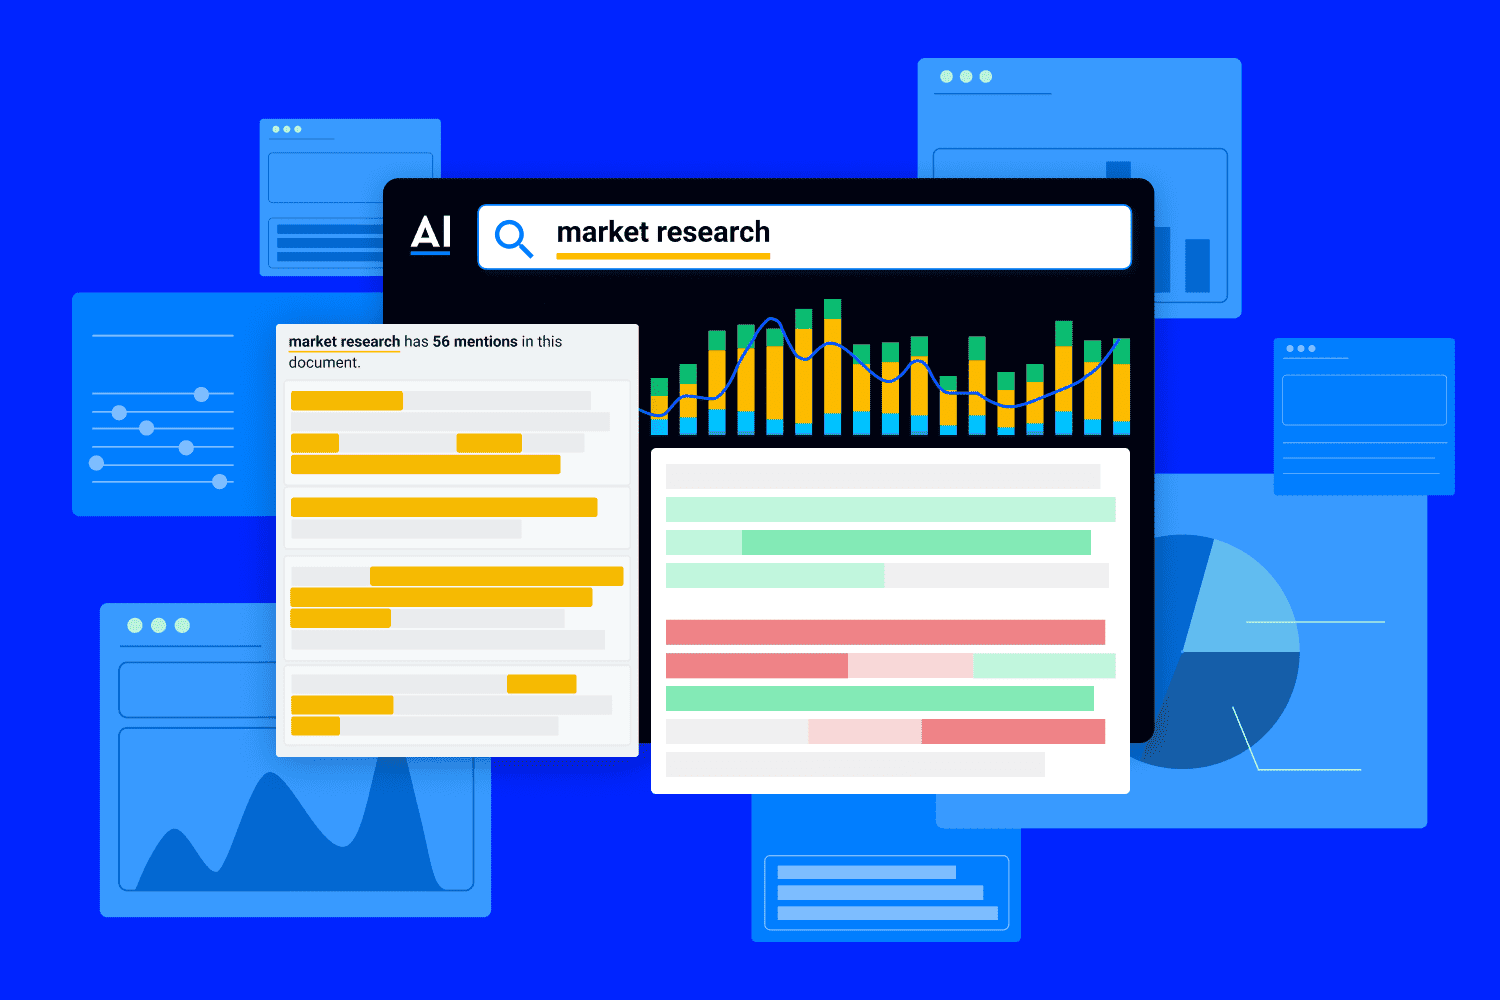 better market research with expert insights